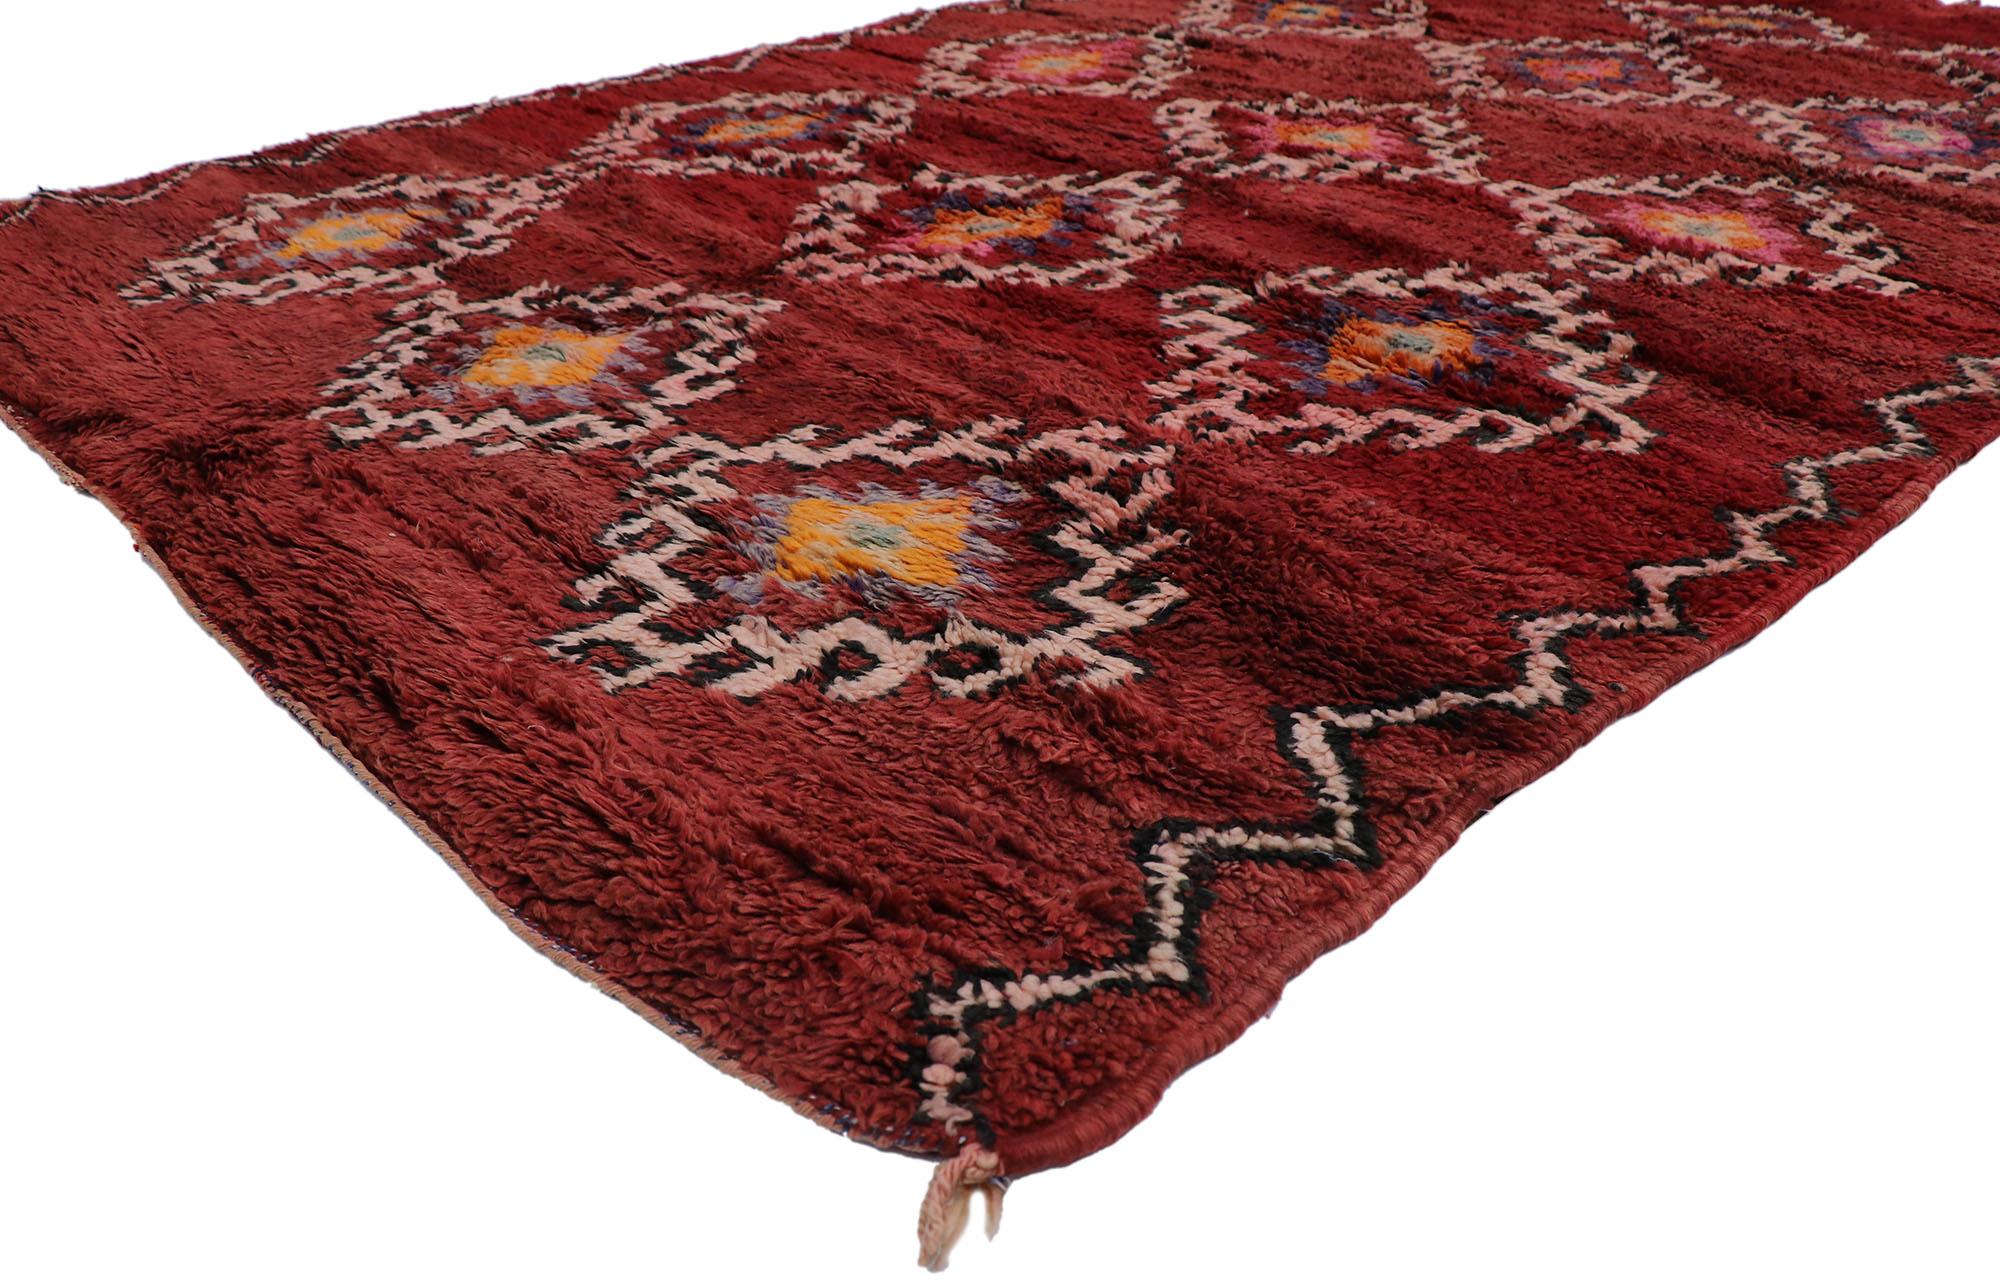 21527 Vintage Berber Red Moroccan rug with Tribal Style 06'05 x 10'05. Showcasing a bold expressive design, incredible detail and texture, this hand knotted wool vintage Berber red Moroccan rug is a captivating vision of woven beauty. The